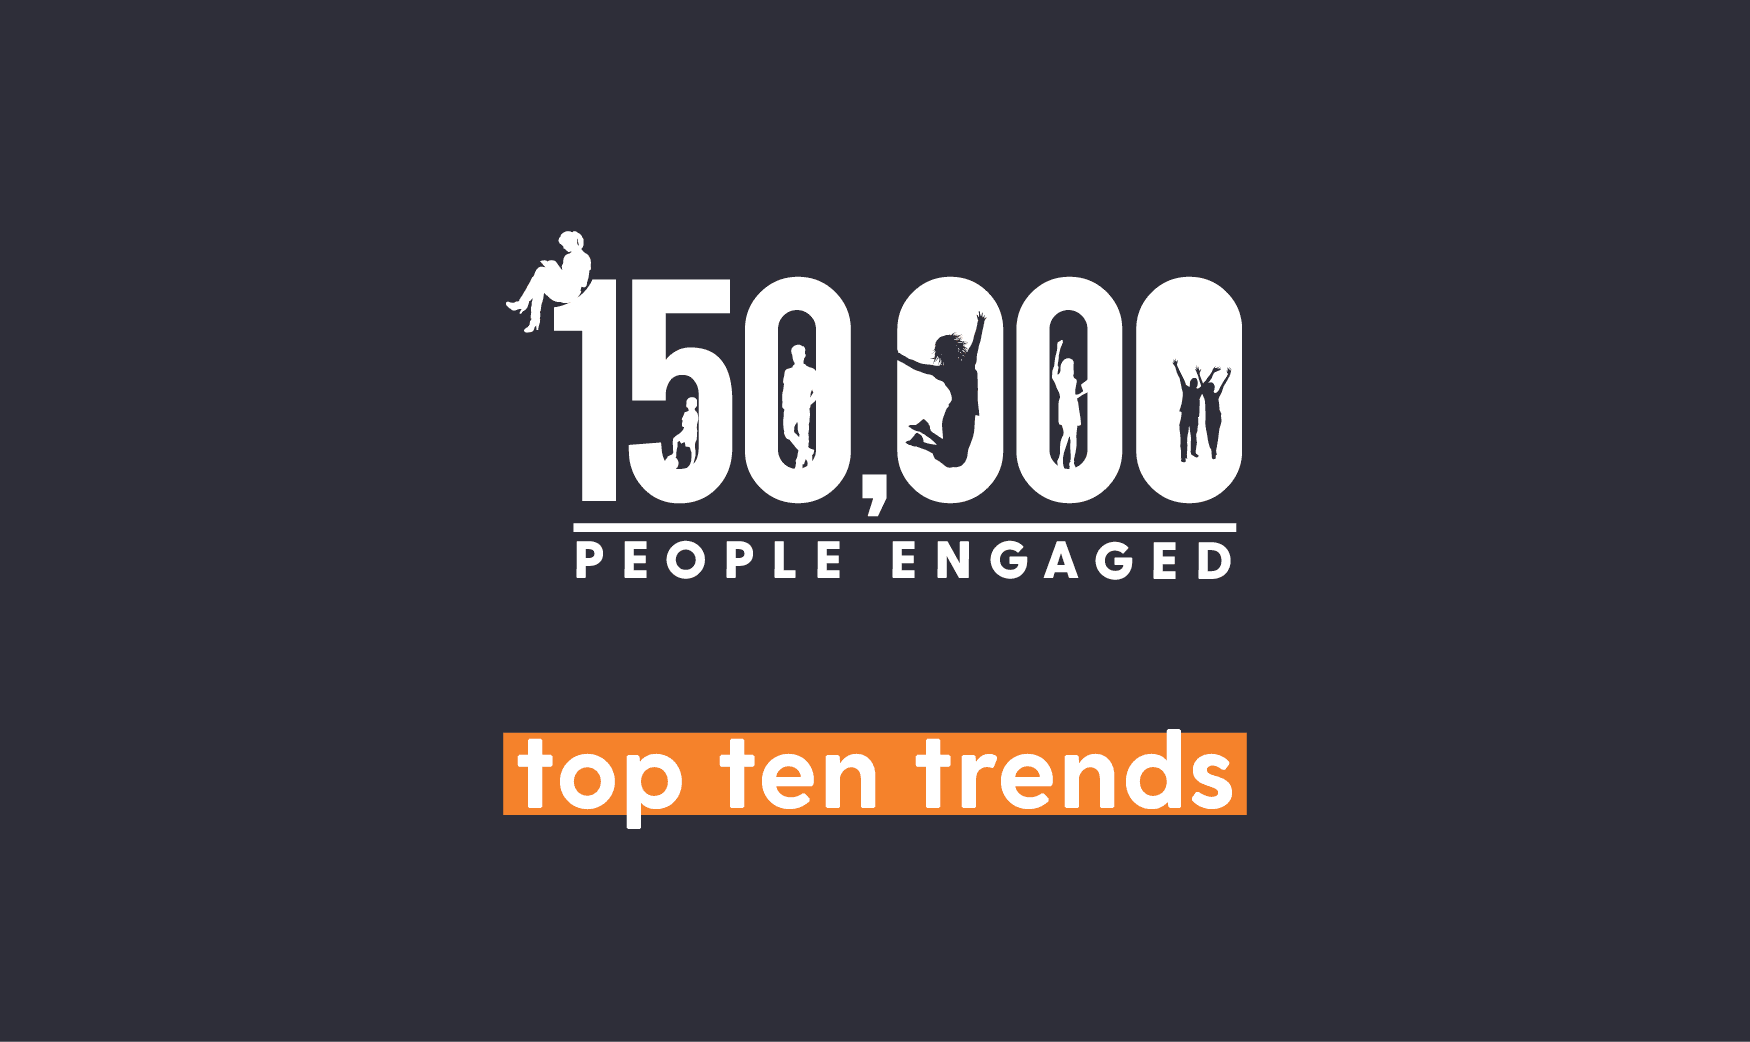 What we learned from engaging with 150,000 people